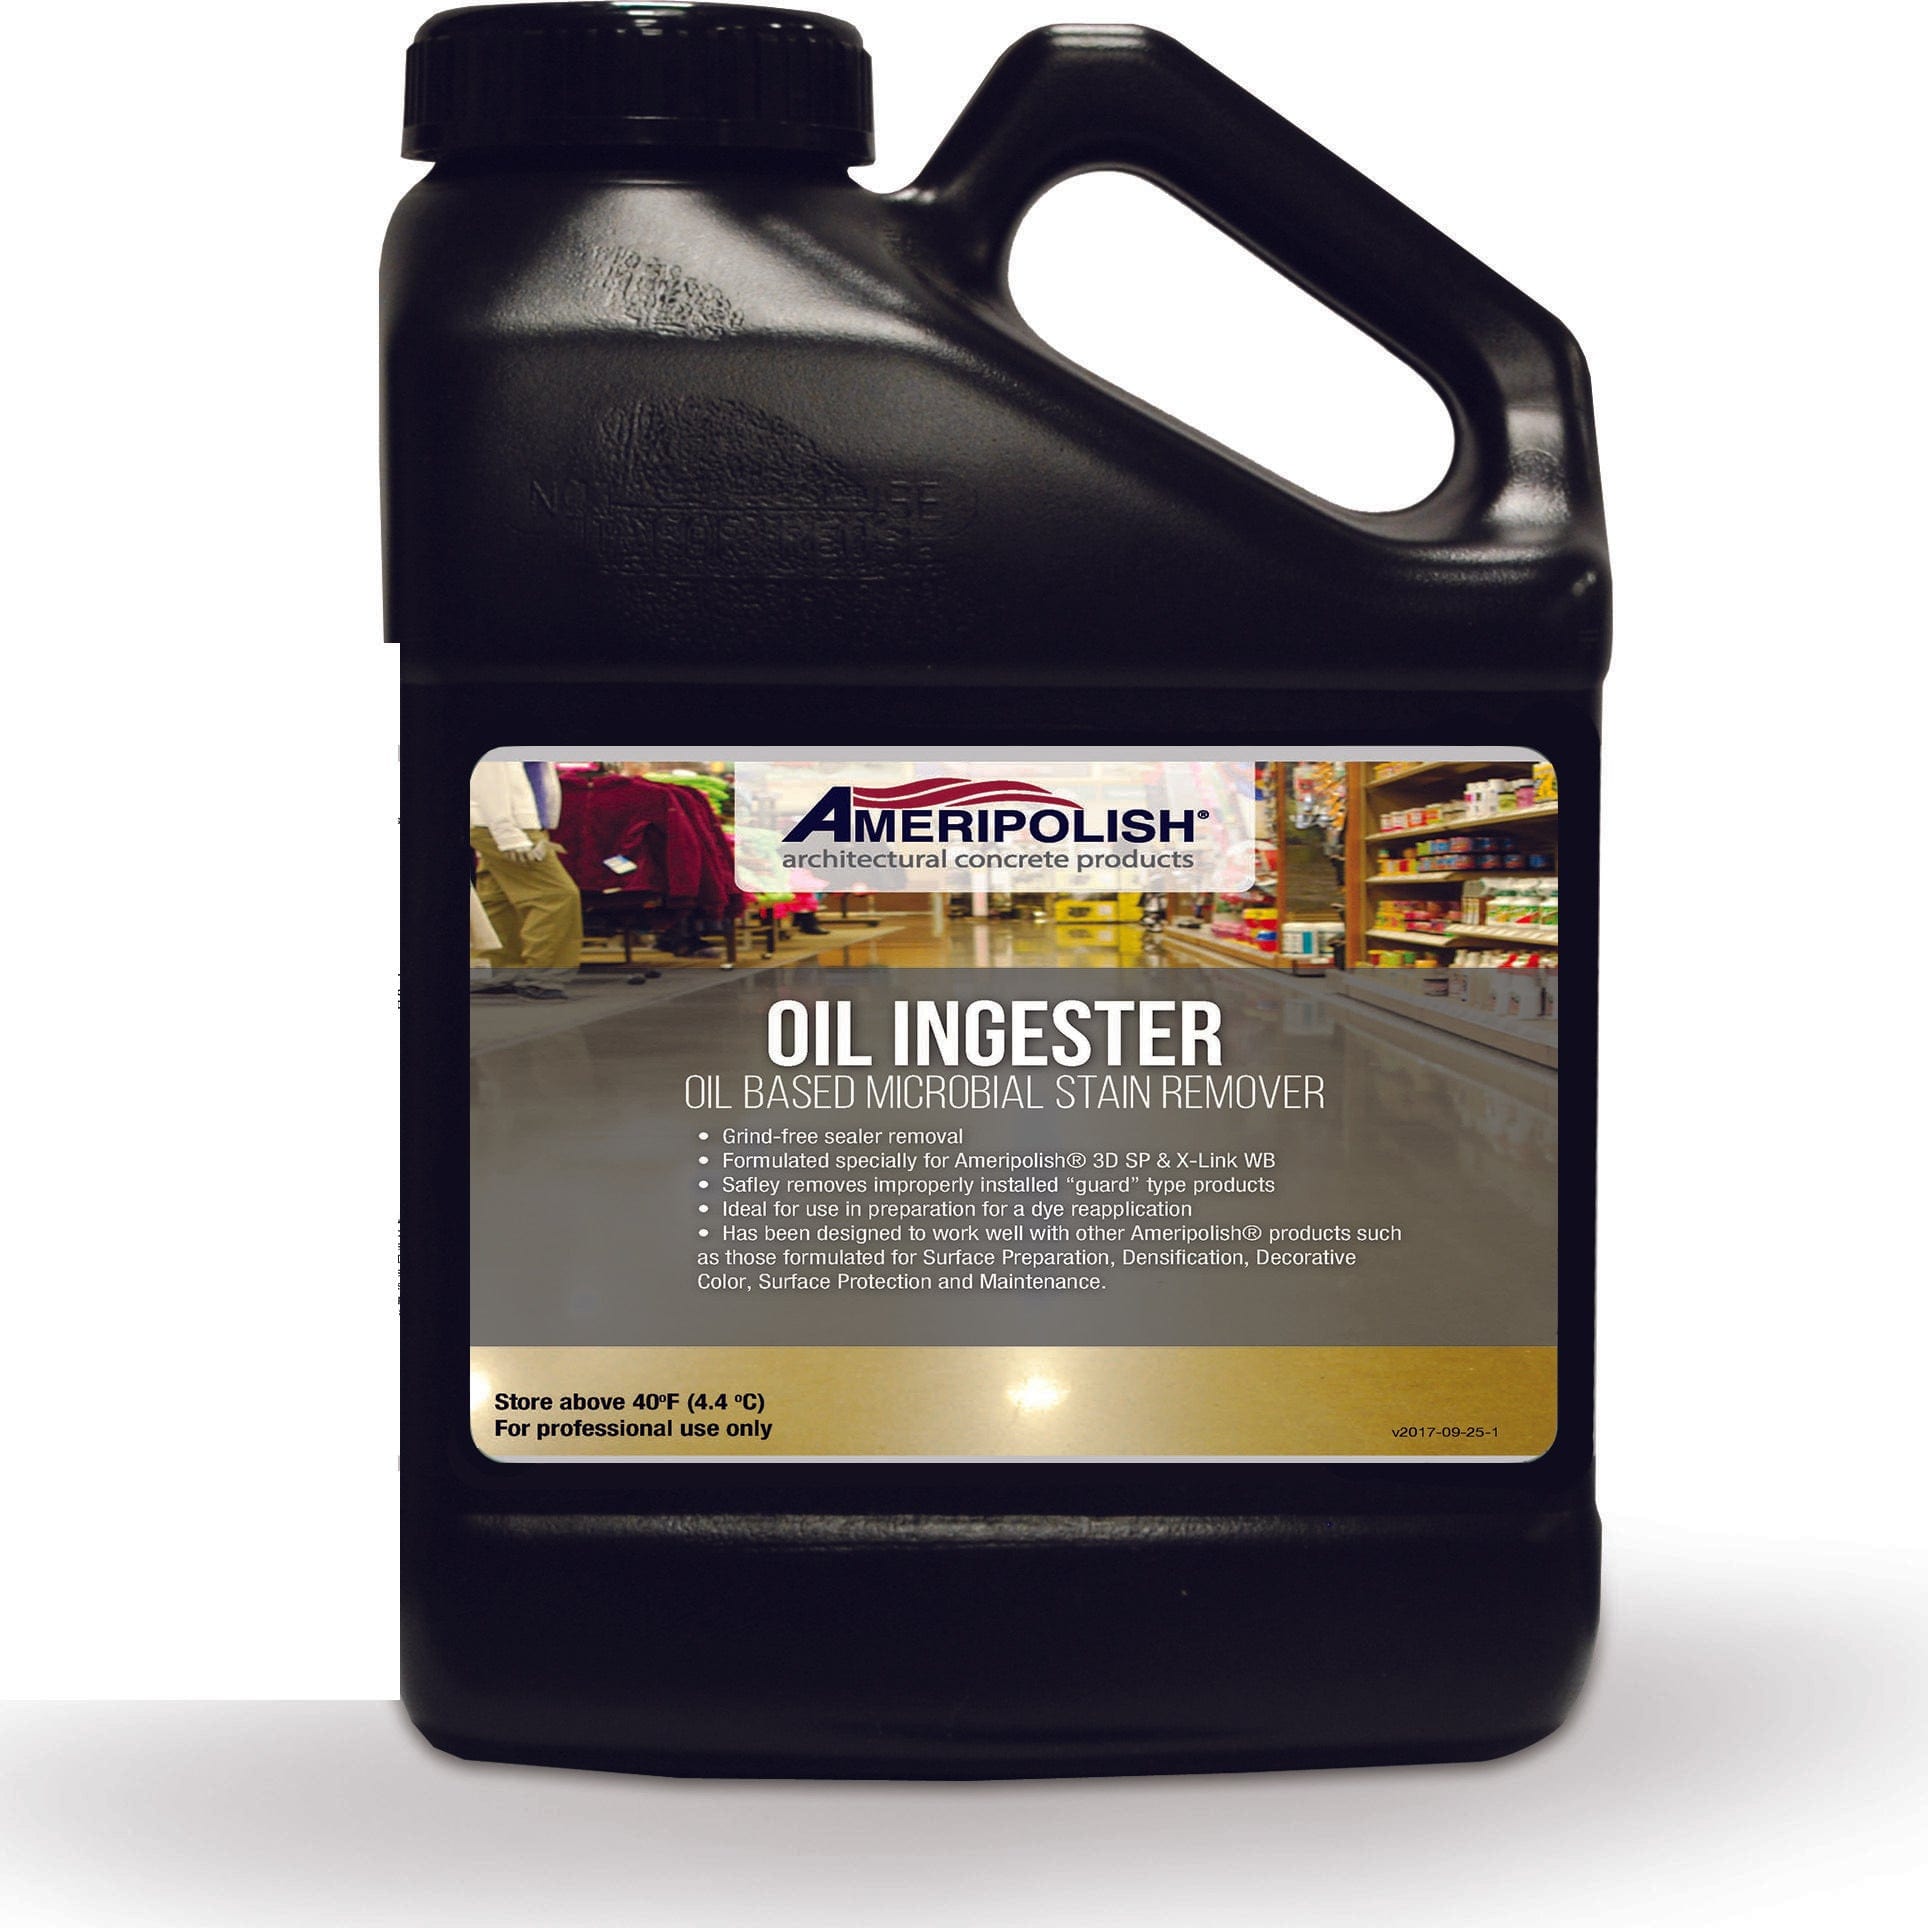 Oil Ingester Concrete Stain Remover - Xtreme Polishing Systems - concrete degreaser, cleaners degreasers, best concrete cleaners, oil remover concrete, degreasers cleaners